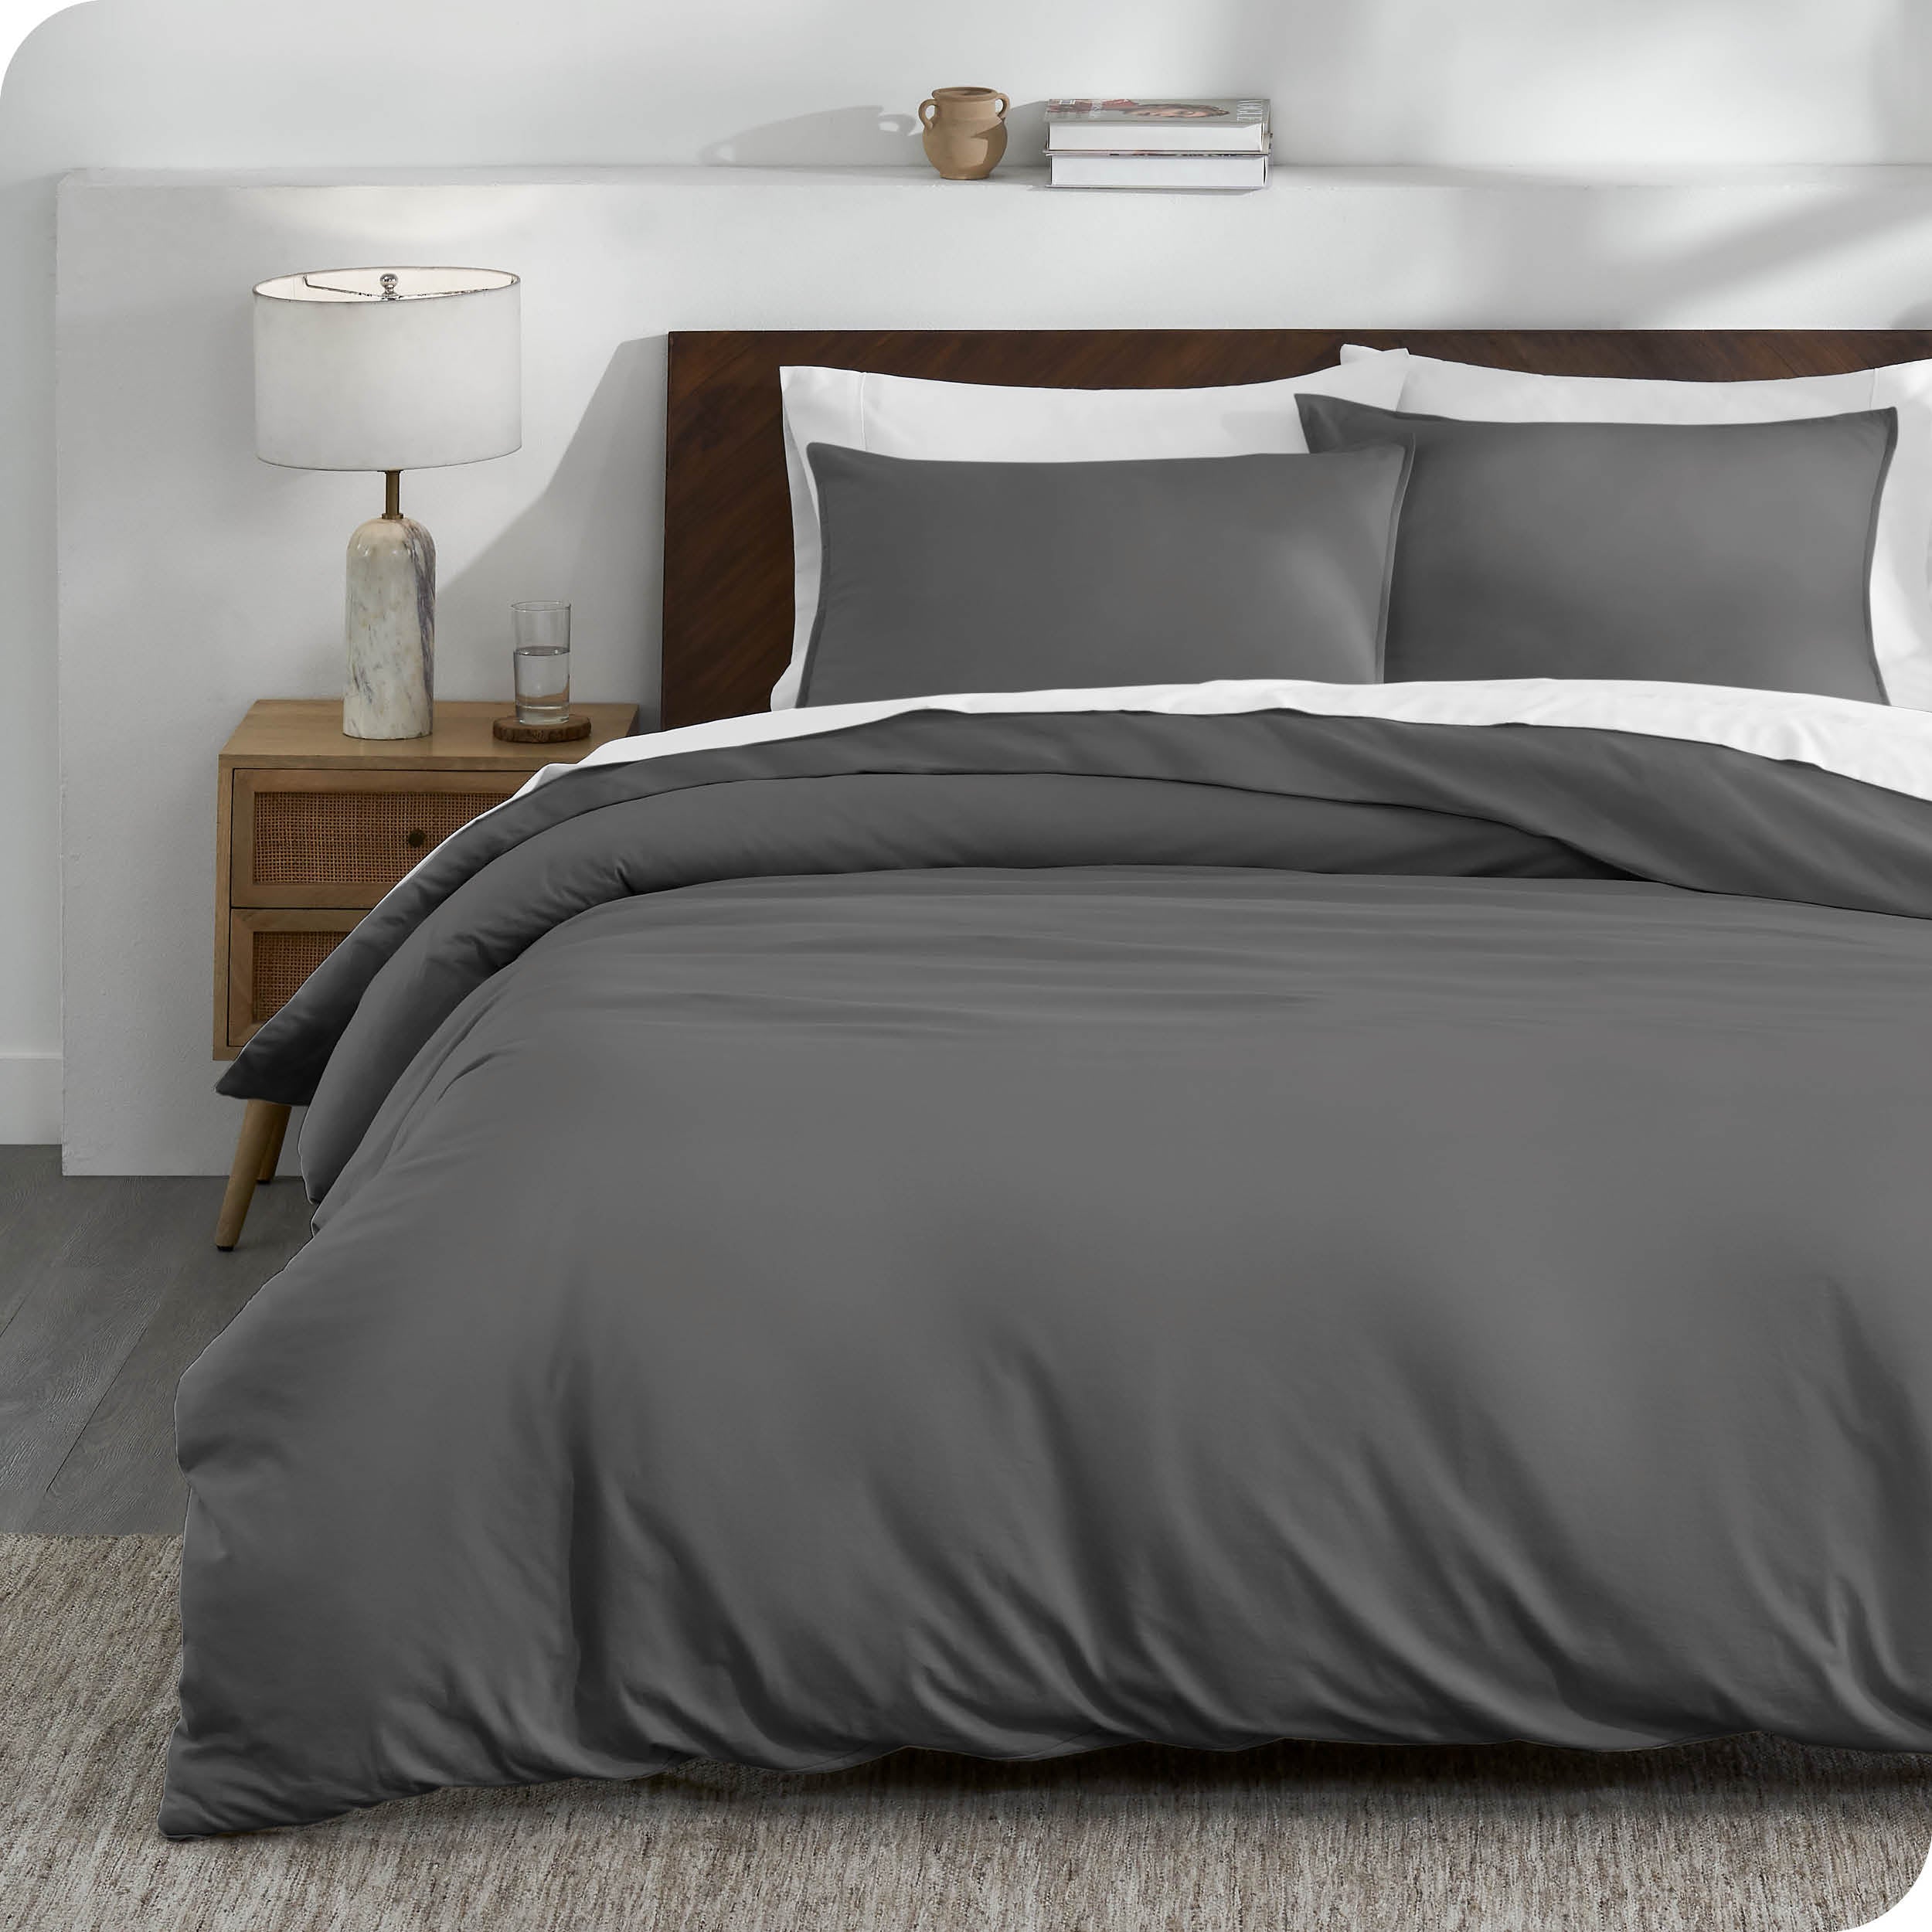 A grey organic cotton jersey duvet cover on a bed made with a white bedding